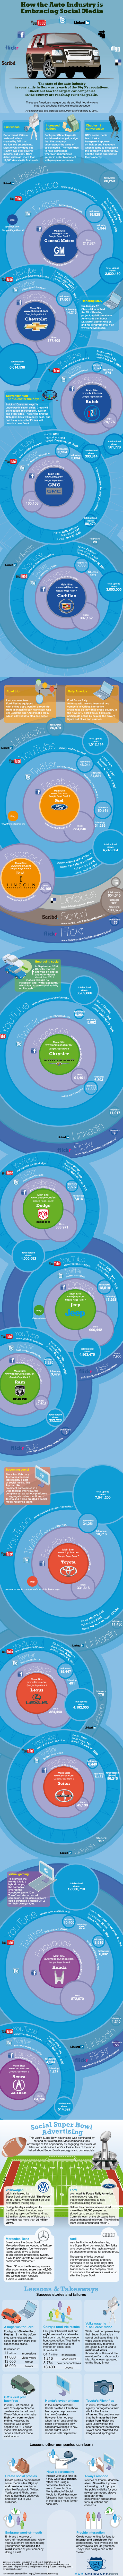 Social Media in the Auto Industry